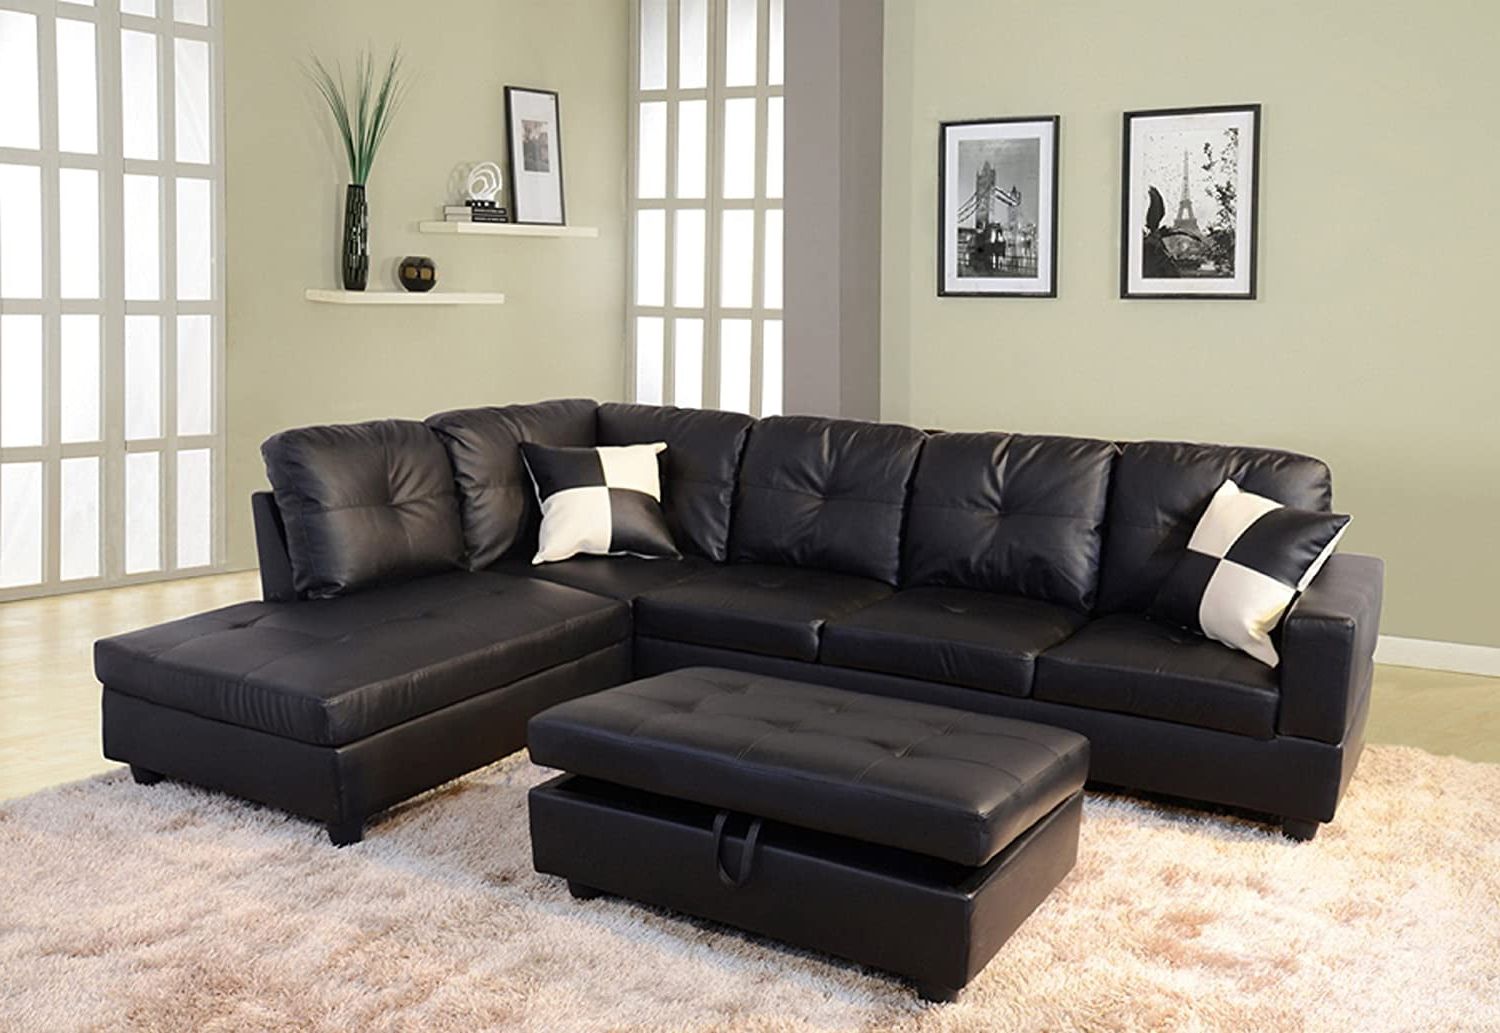 Faux Leather Sectional Sofa Sets For Popular Dae Right Facing Sectional Sofa, L Shape Faux Leather Sectional Sofa (View 15 of 15)